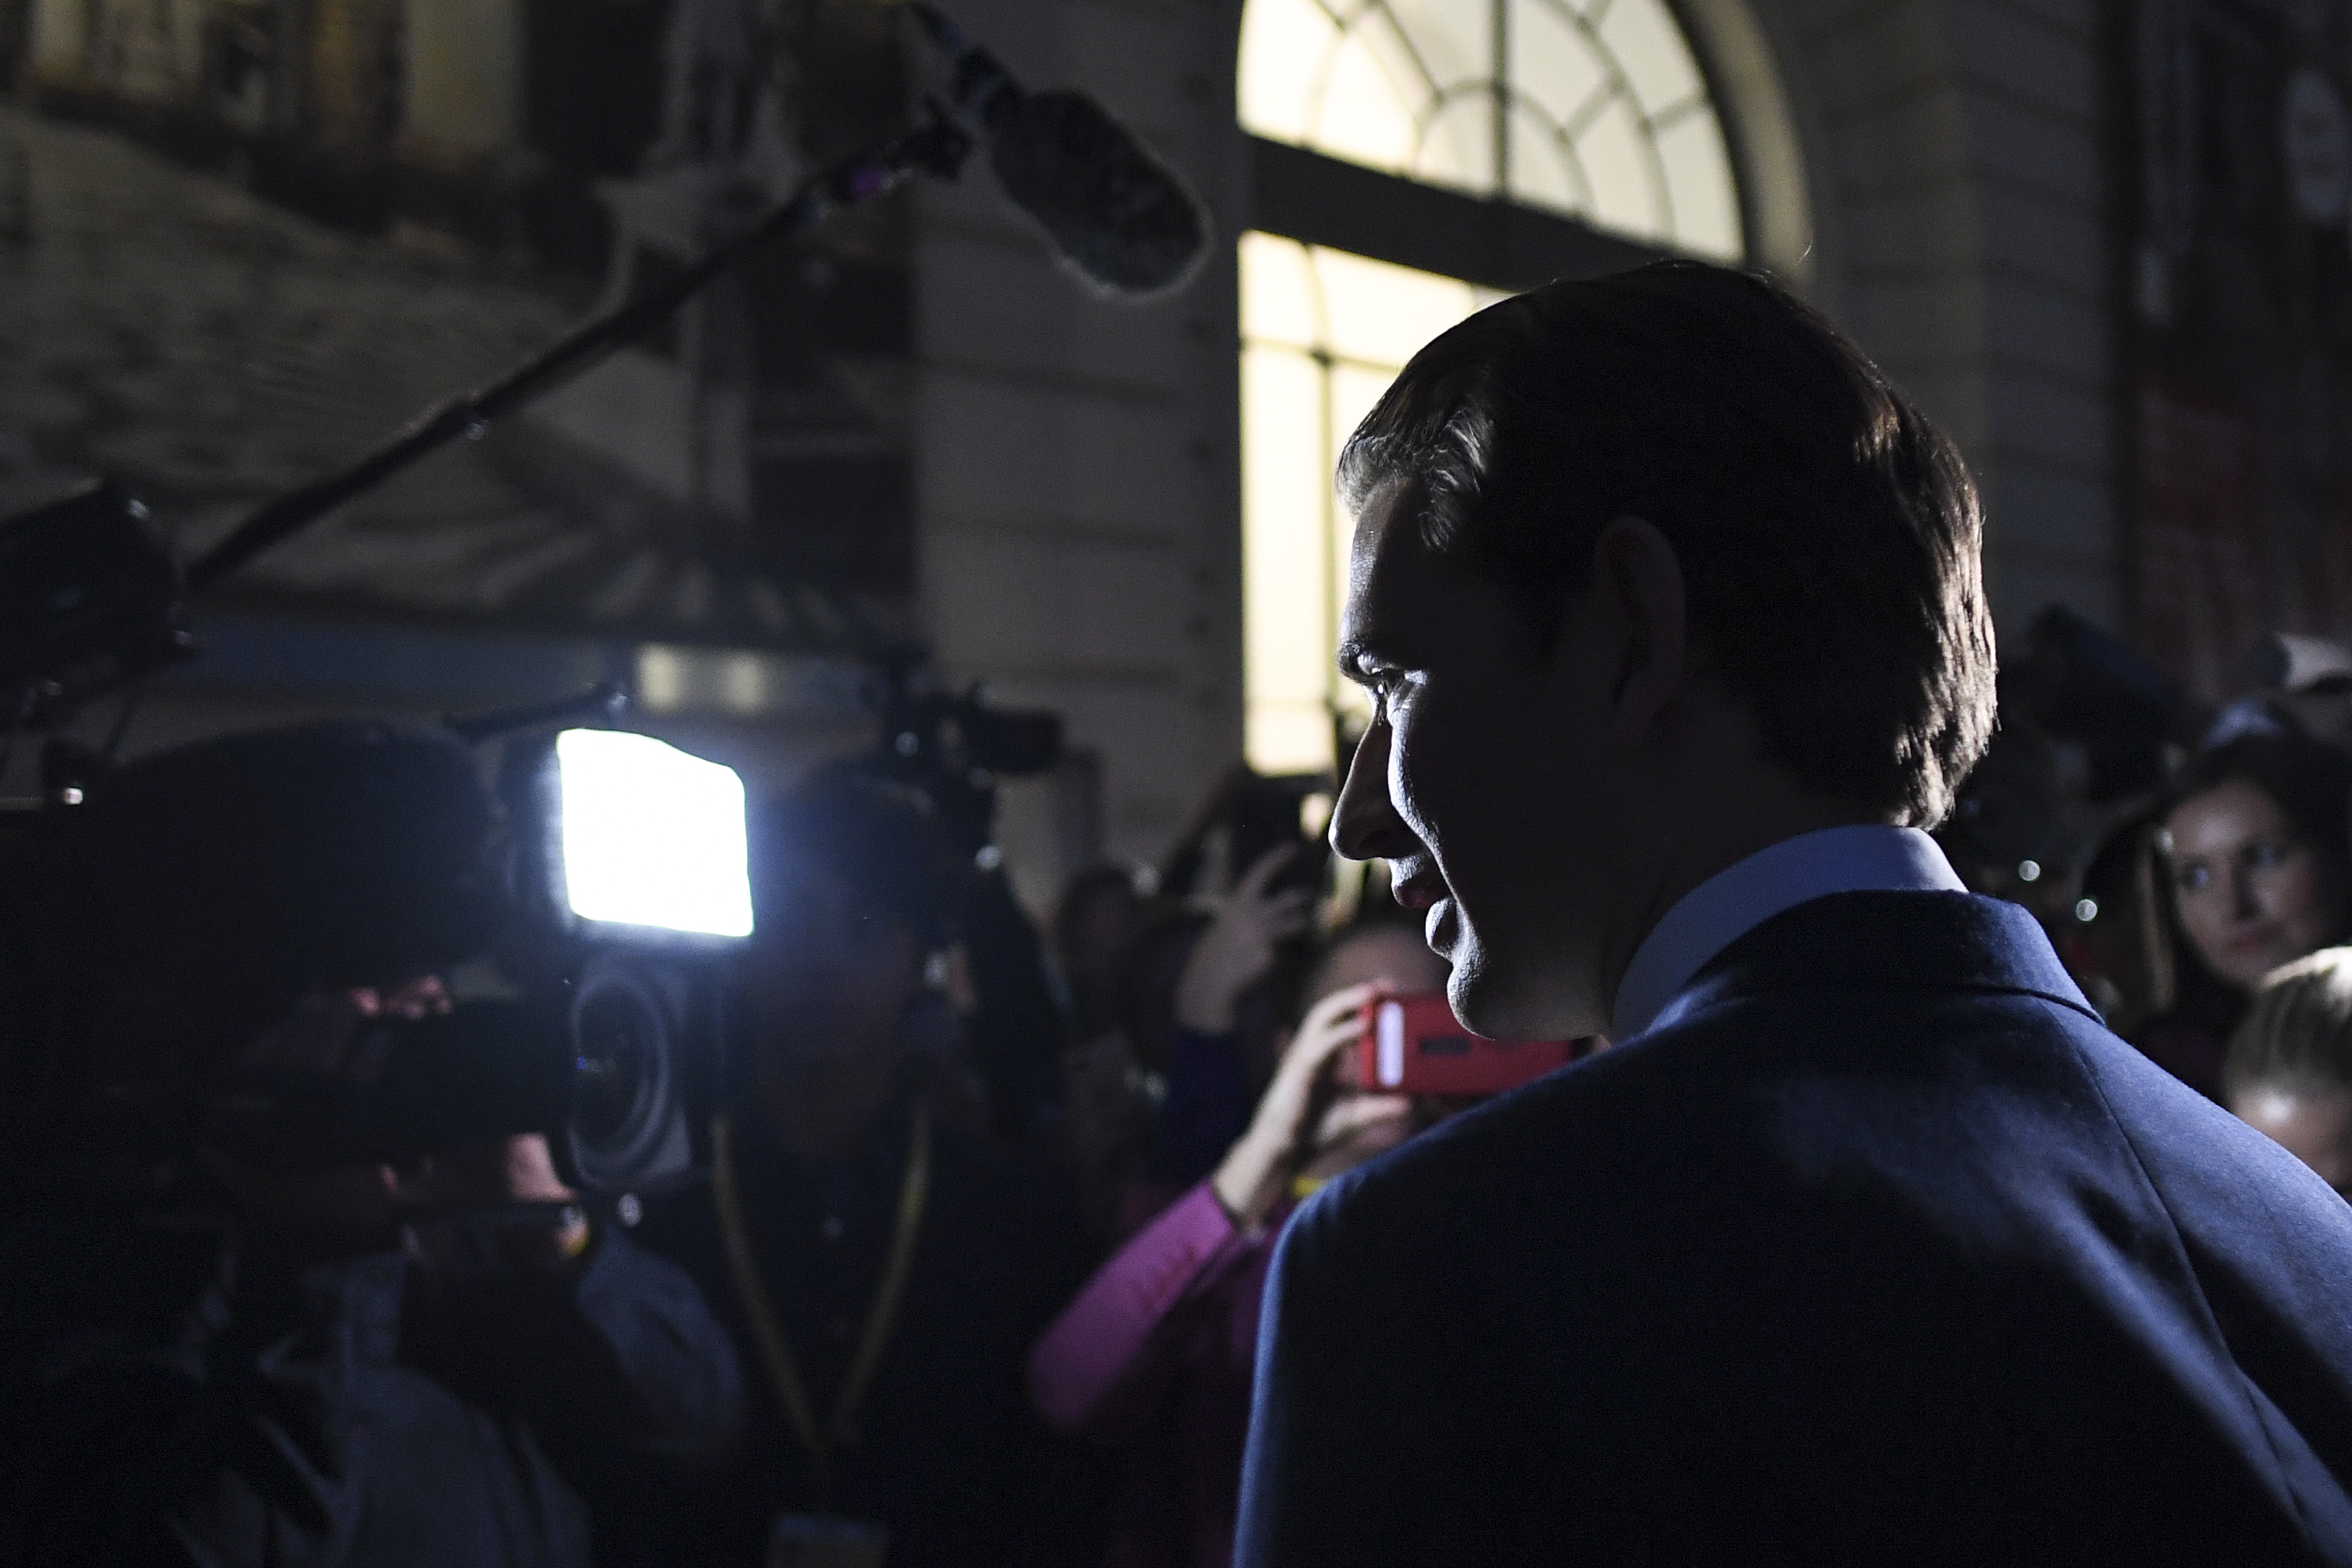 epa07880642 Sebastian Kurz, leader of Austrian People's Party (OeVP) and OeVP top candidate, addresses media outside an OeVP election party for the Austrian federal elections in Vienna, Austria, 29 September 2019. Projections published after the polls closed saw the OeVP as the clear winner of the general election.  EPA/CHRISTIAN BRUNA